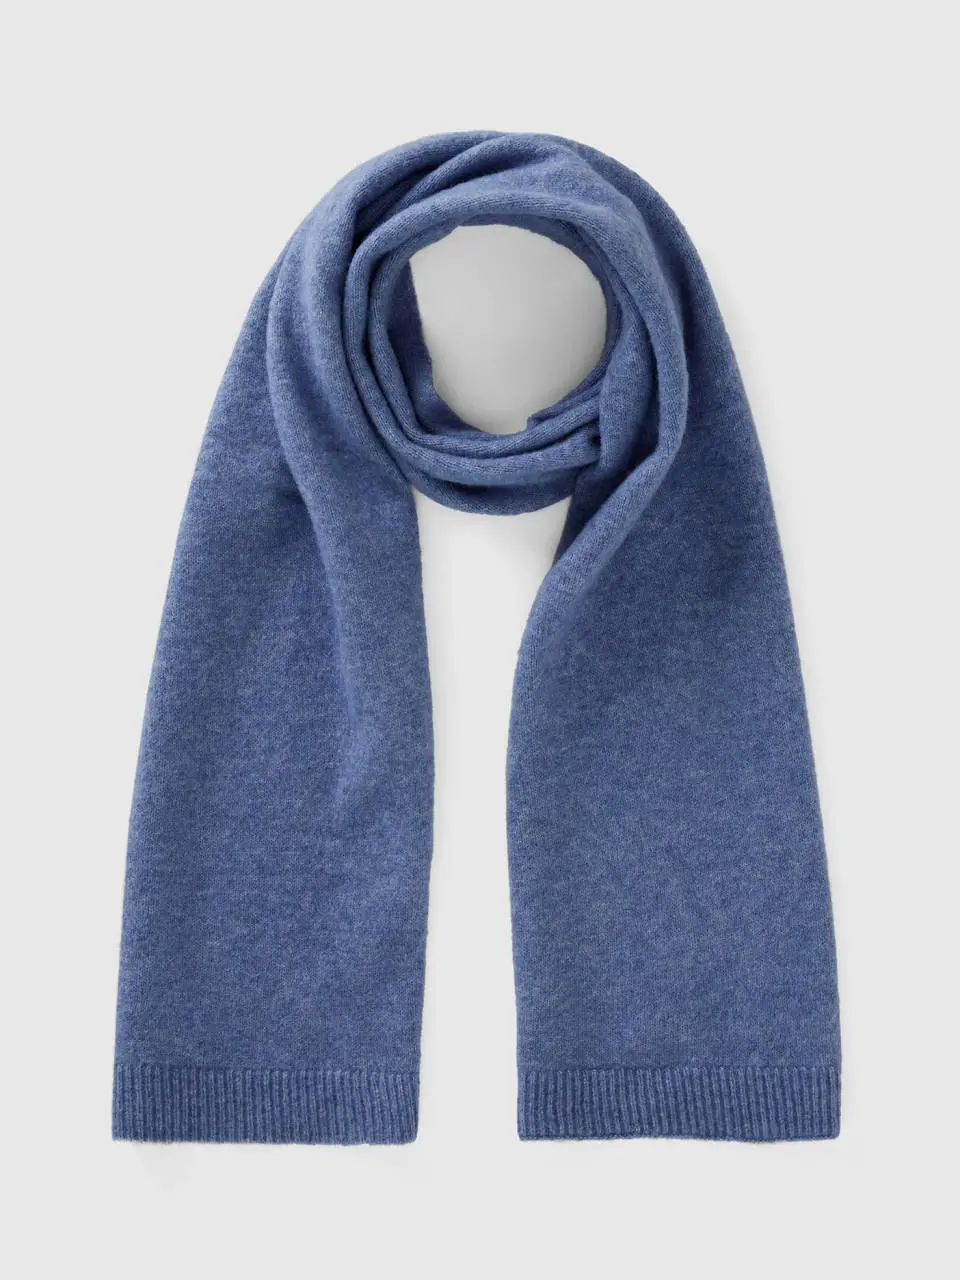 Benetton scarf in recycled yarn. 1